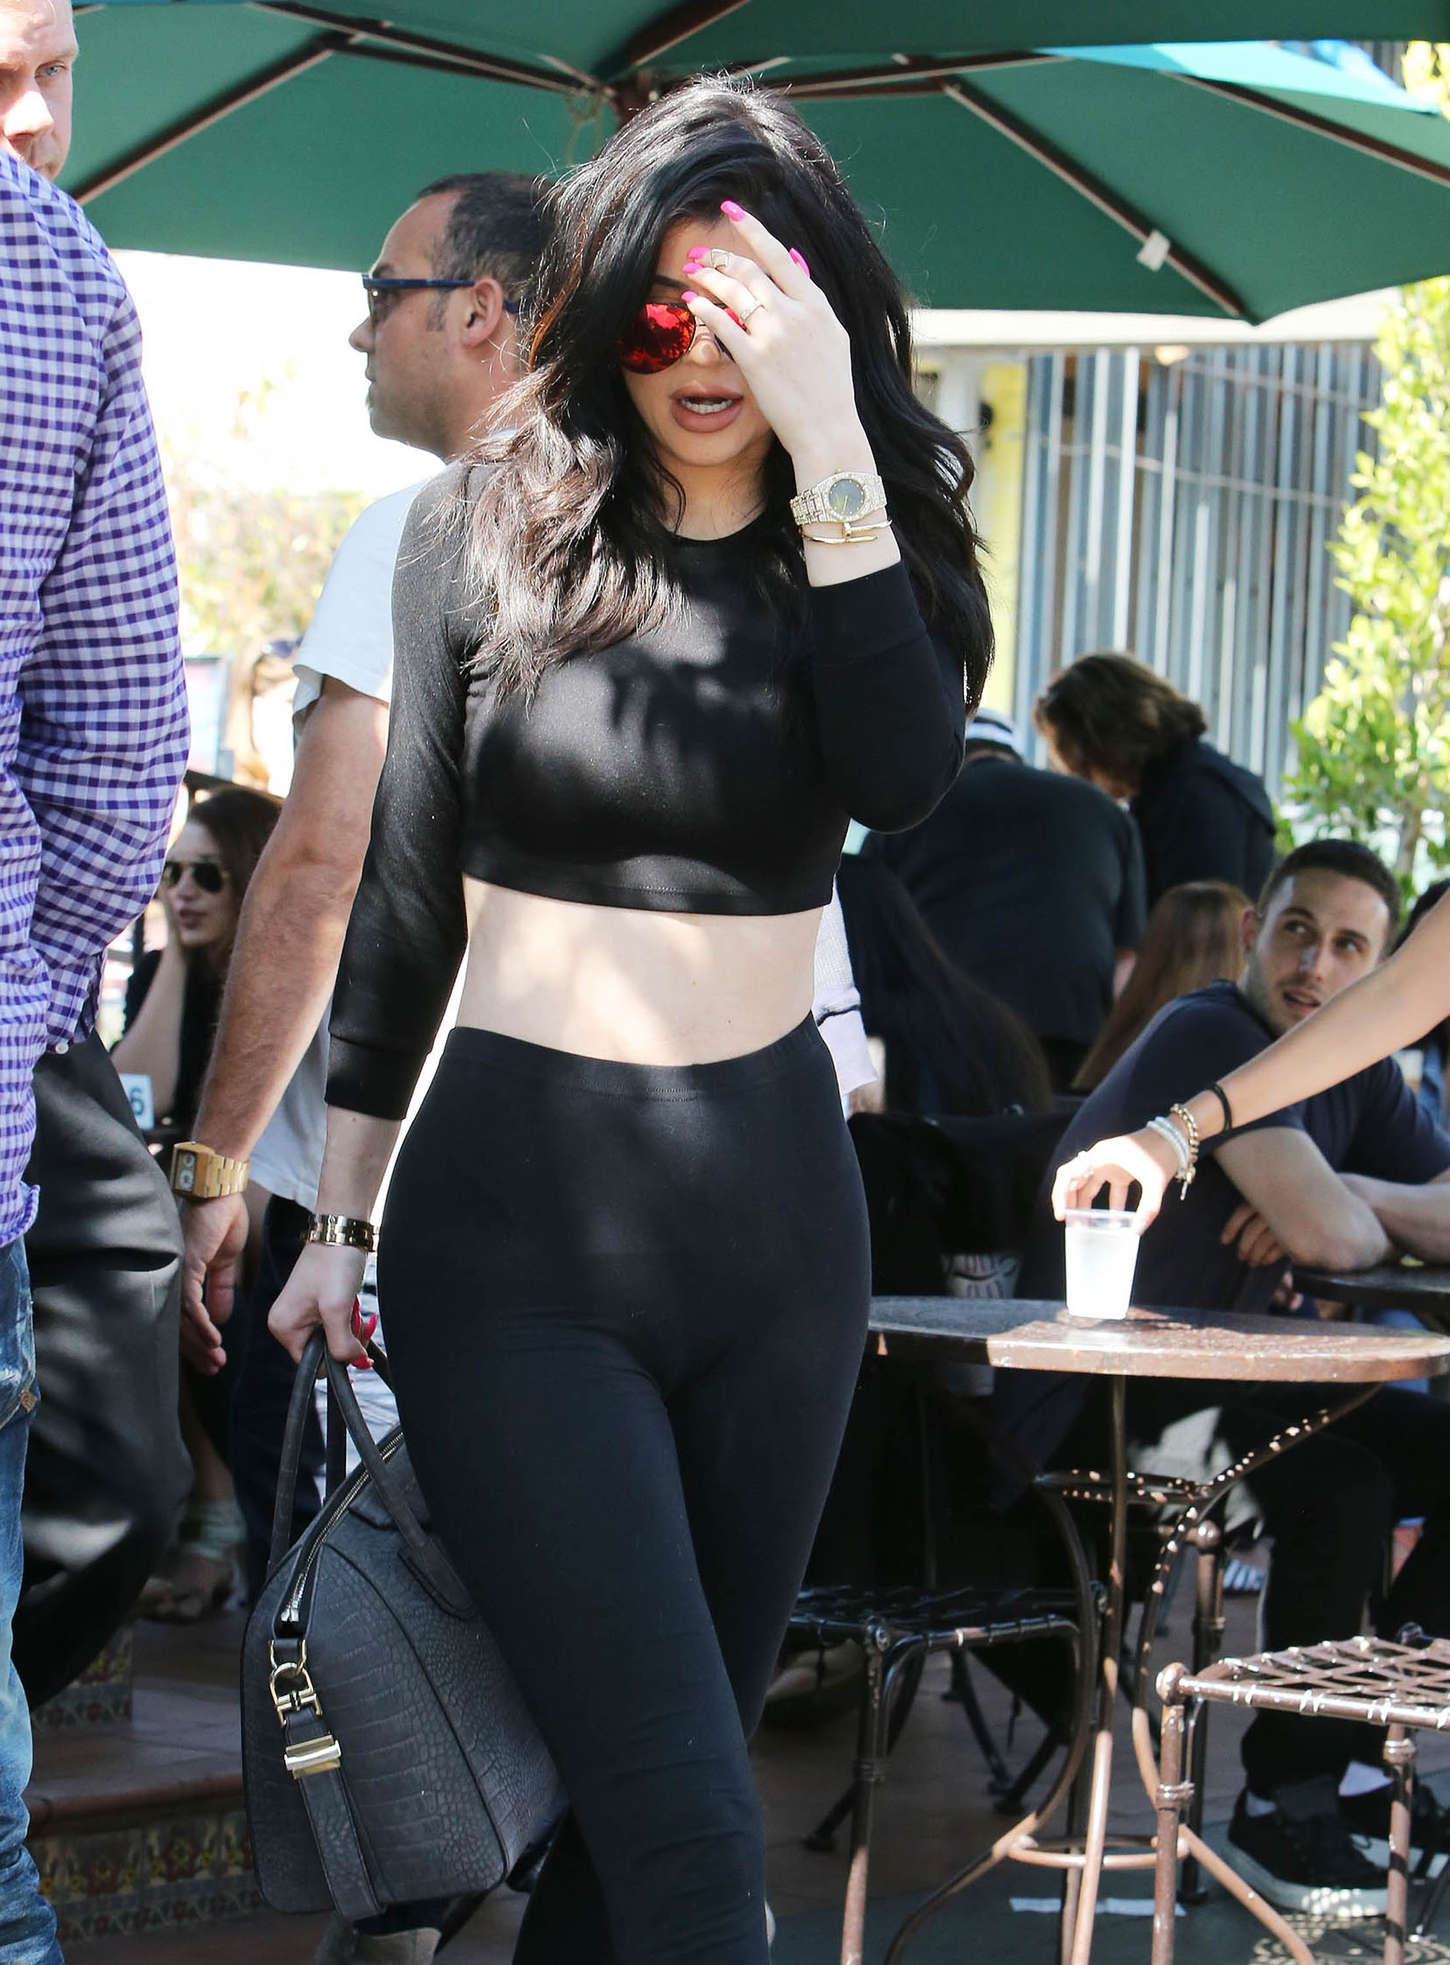 Kylie Jenner 2015 : Kylie Jenner Booty in Tights -17. 